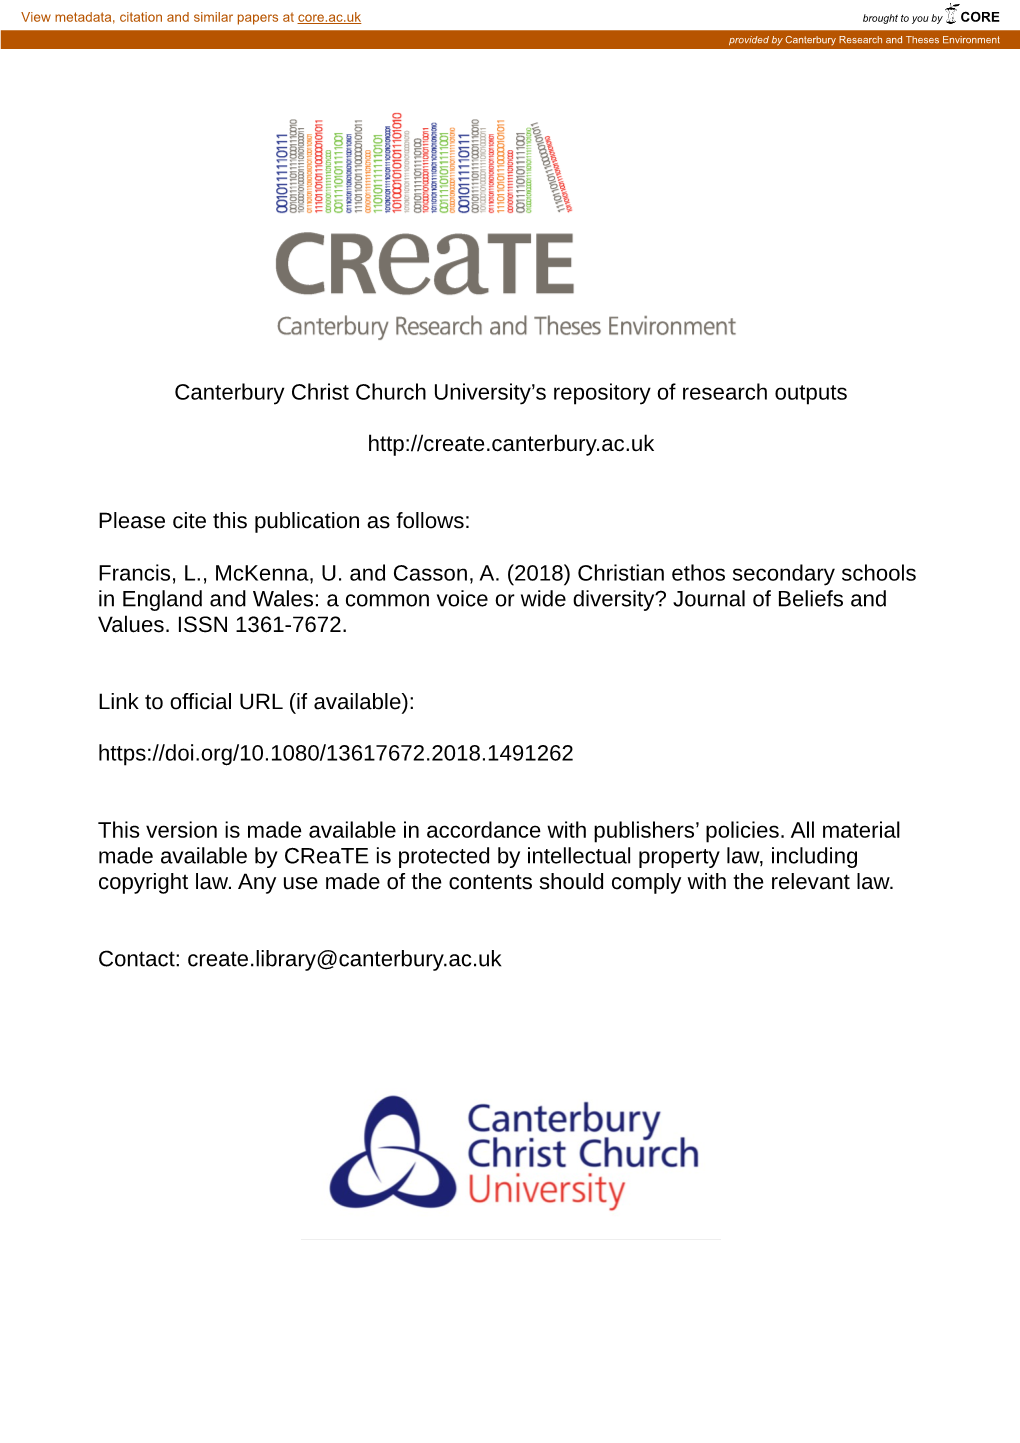 Canterbury Christ Church University's Repository of Research Outputs Please Cite This Publicati